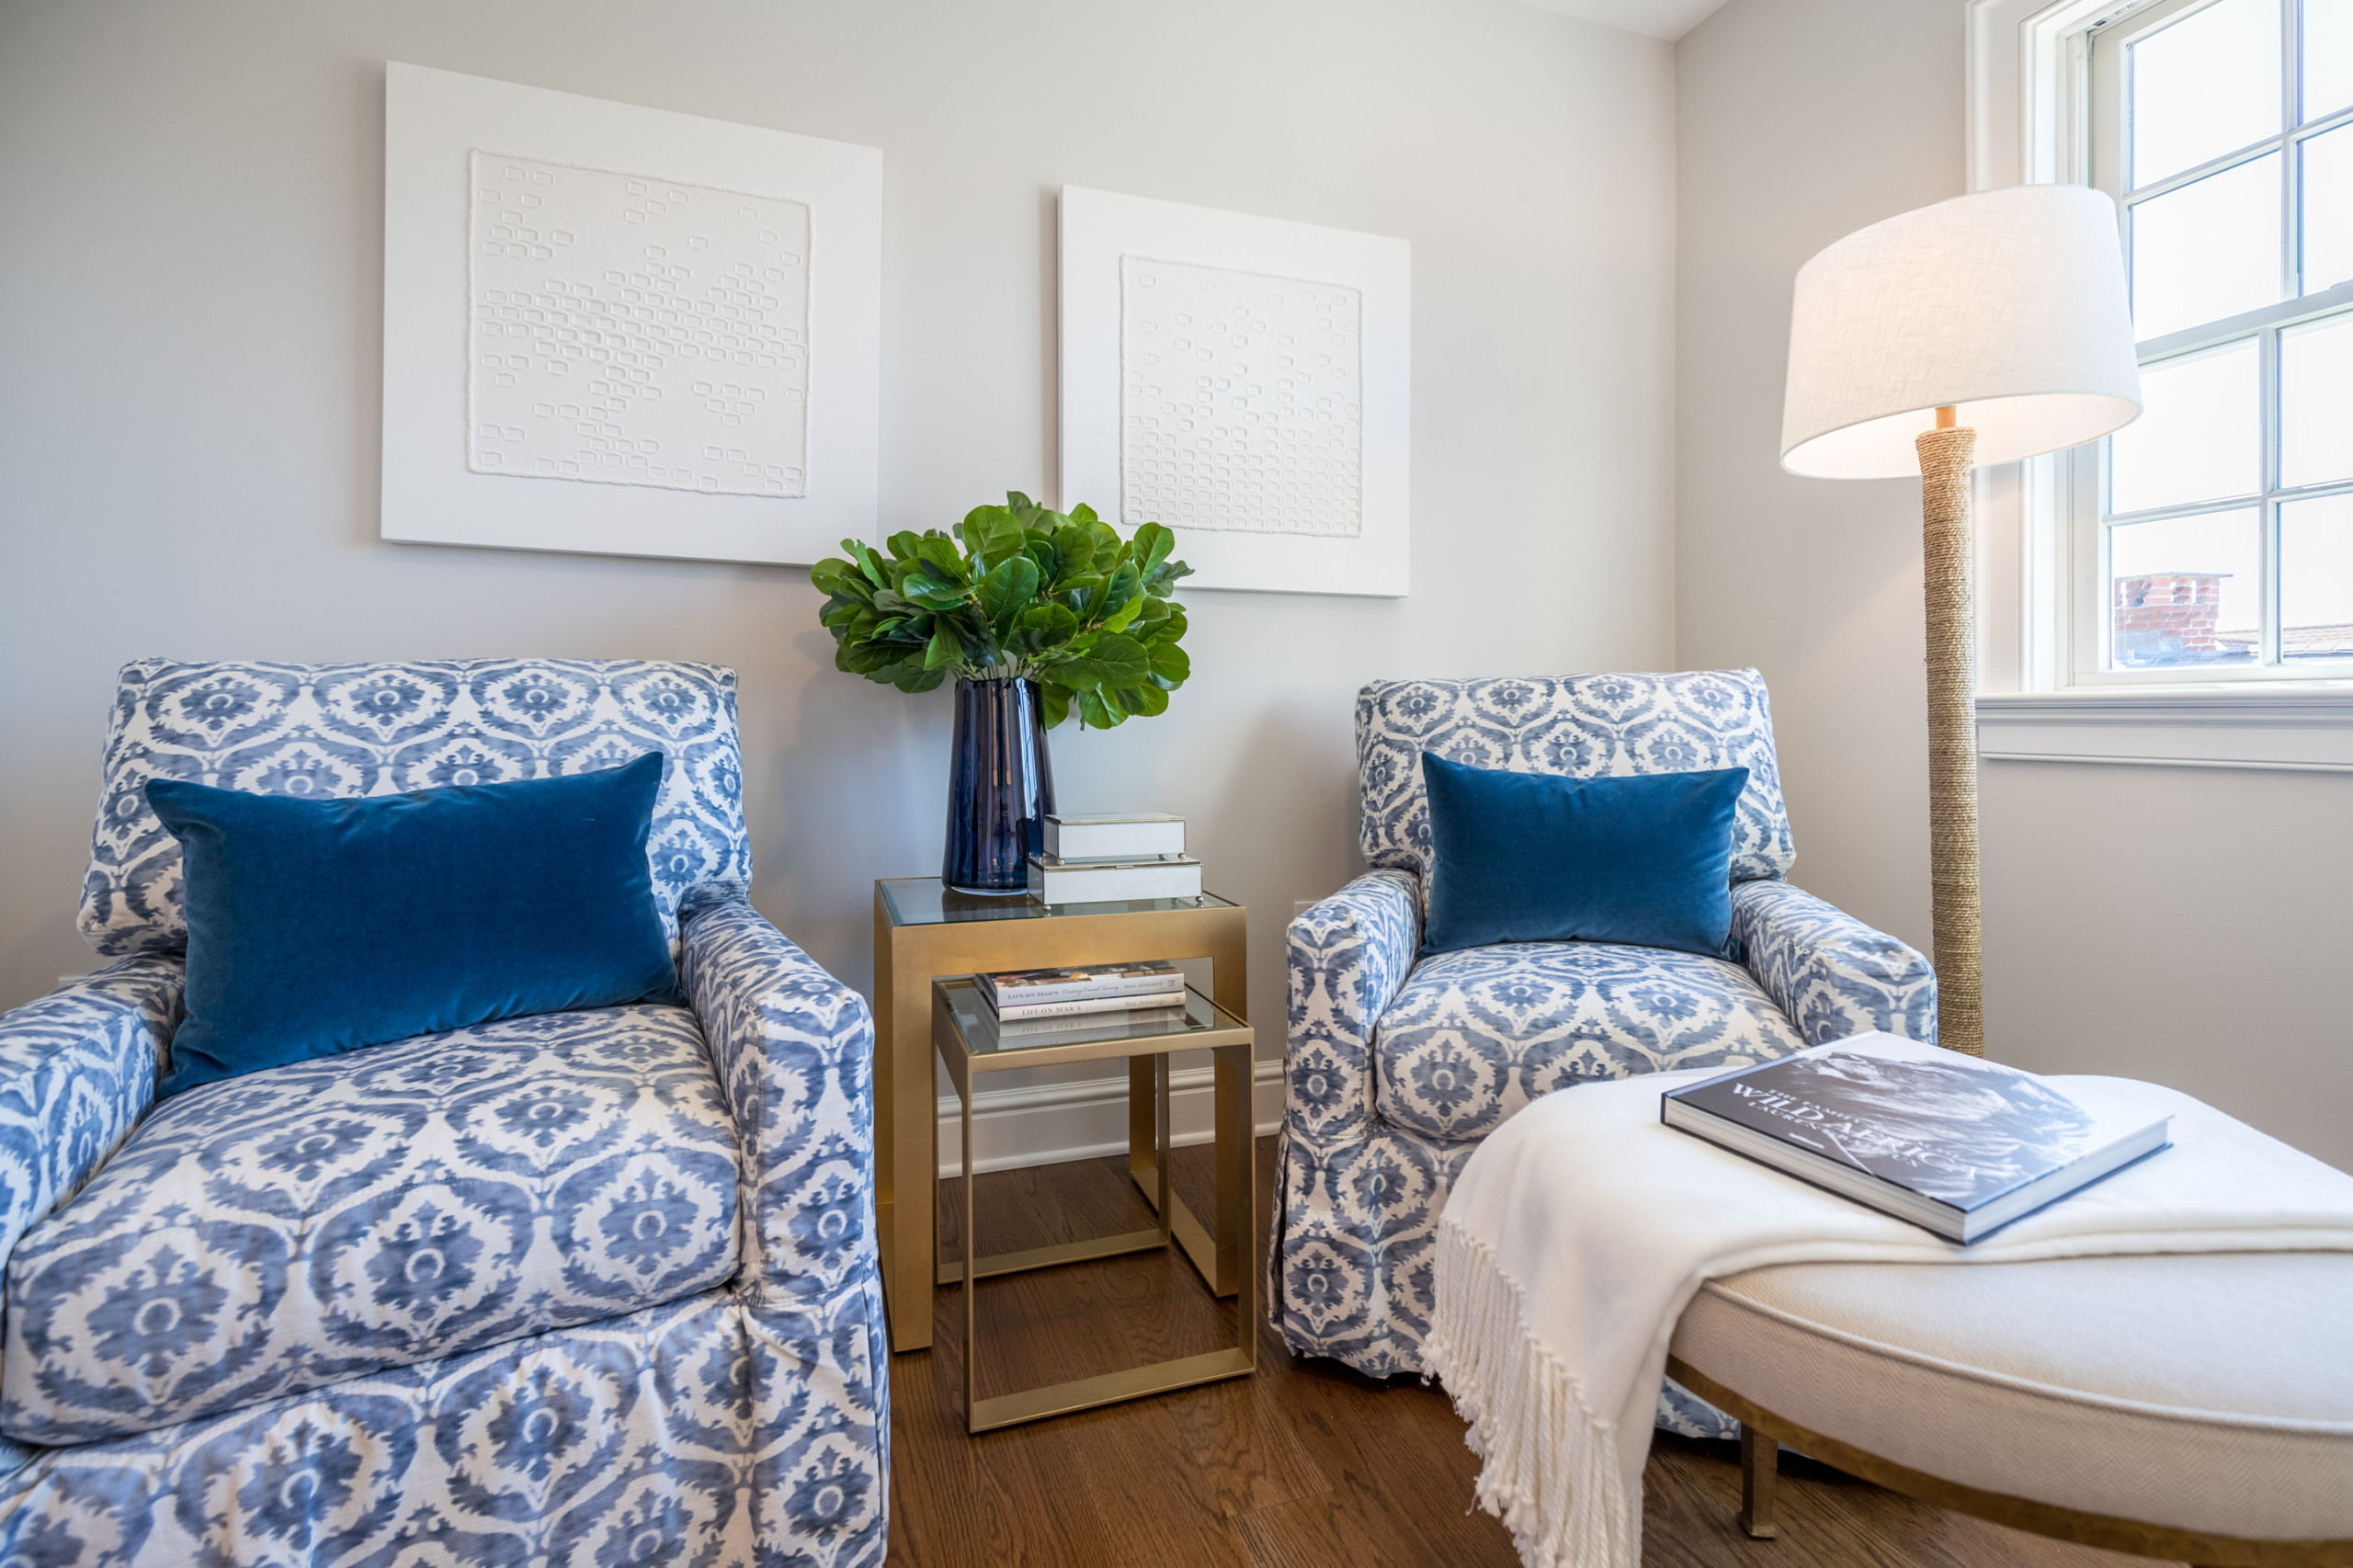 75 Beautiful Living Space Pictures Ideas July 2020 Houzz